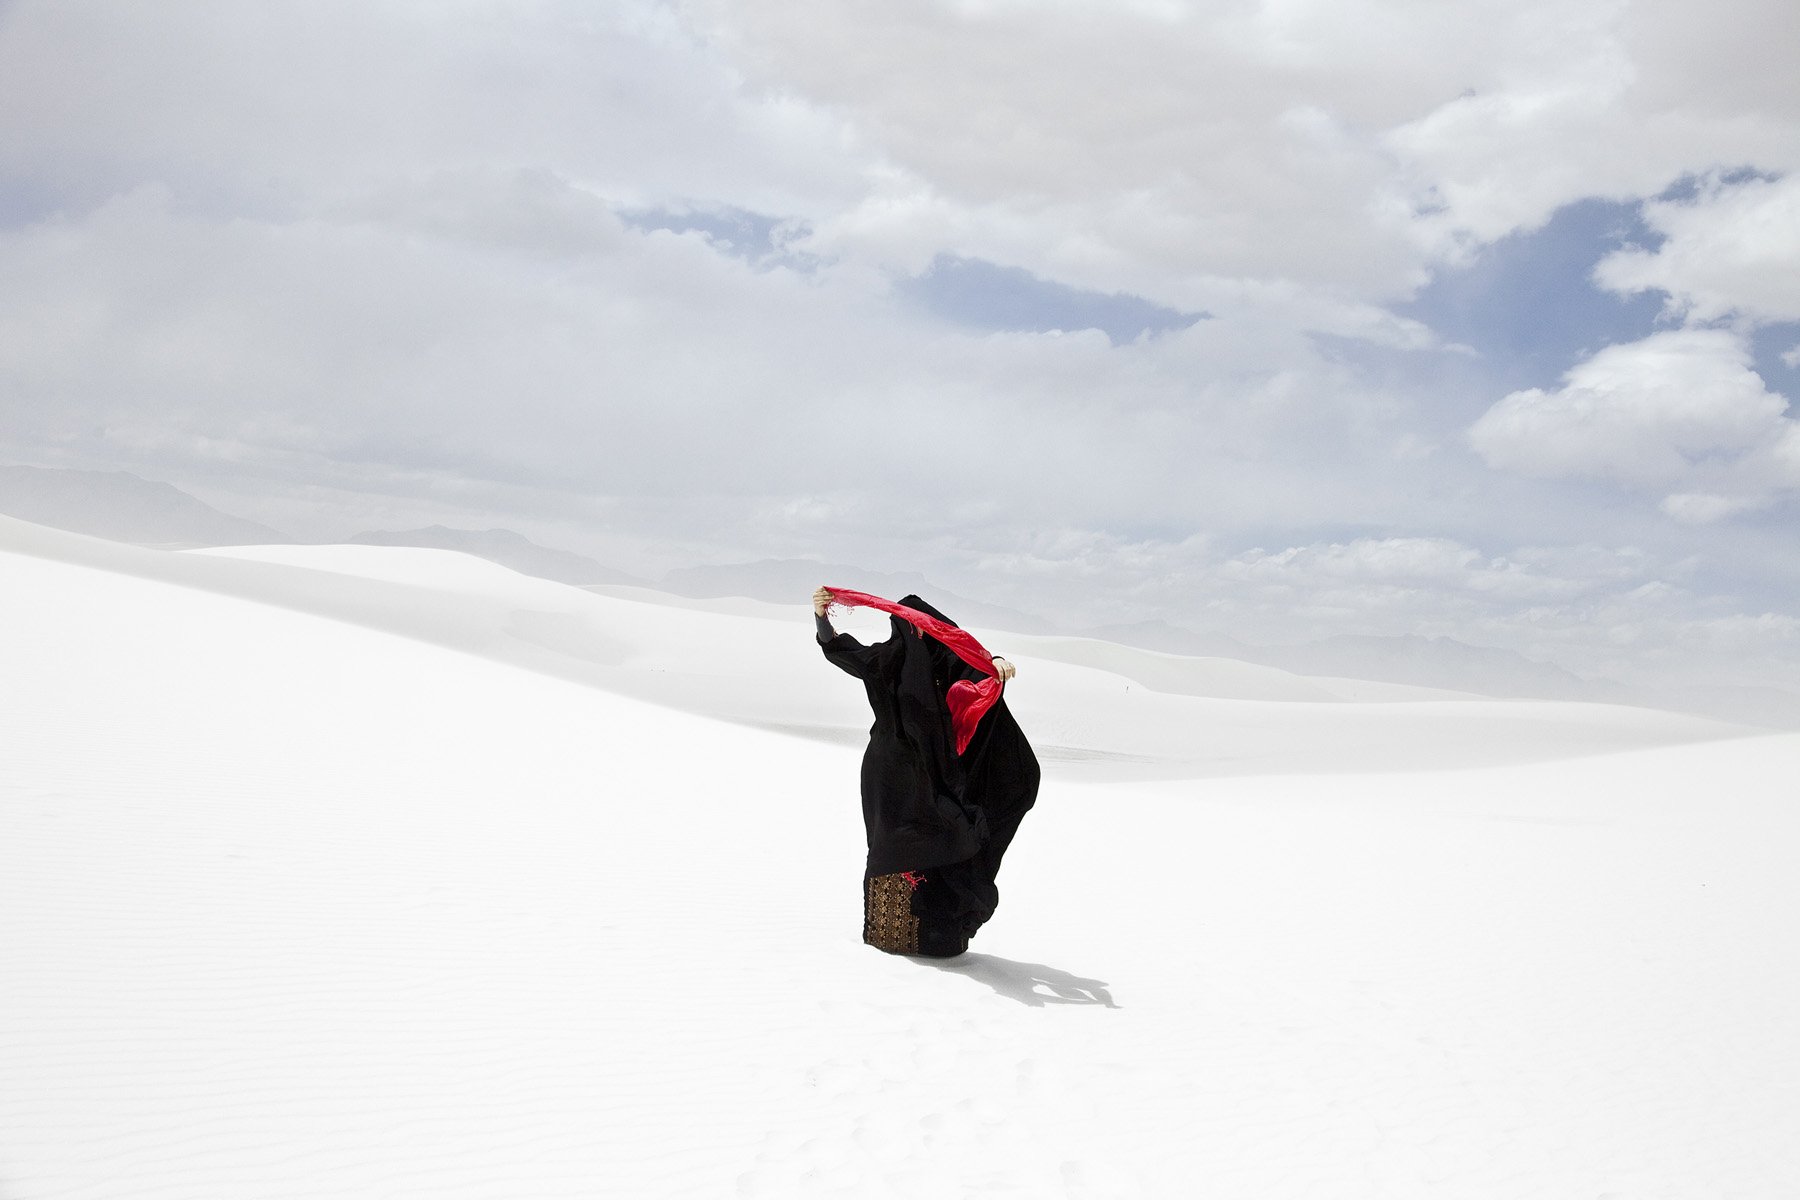  &nbsp;Sama Alshaibi,   Taʾshir   (Marking) from the series Silsila, 2010  Inkjet pigment print, 27 ½ x 39 3/8 inches and Chromogenic print mounted on Diasec at 5 feet 5 3/8 inches x 8 feet 2 3/8 inches  courtesy of the artist and Ayyam Gallery 